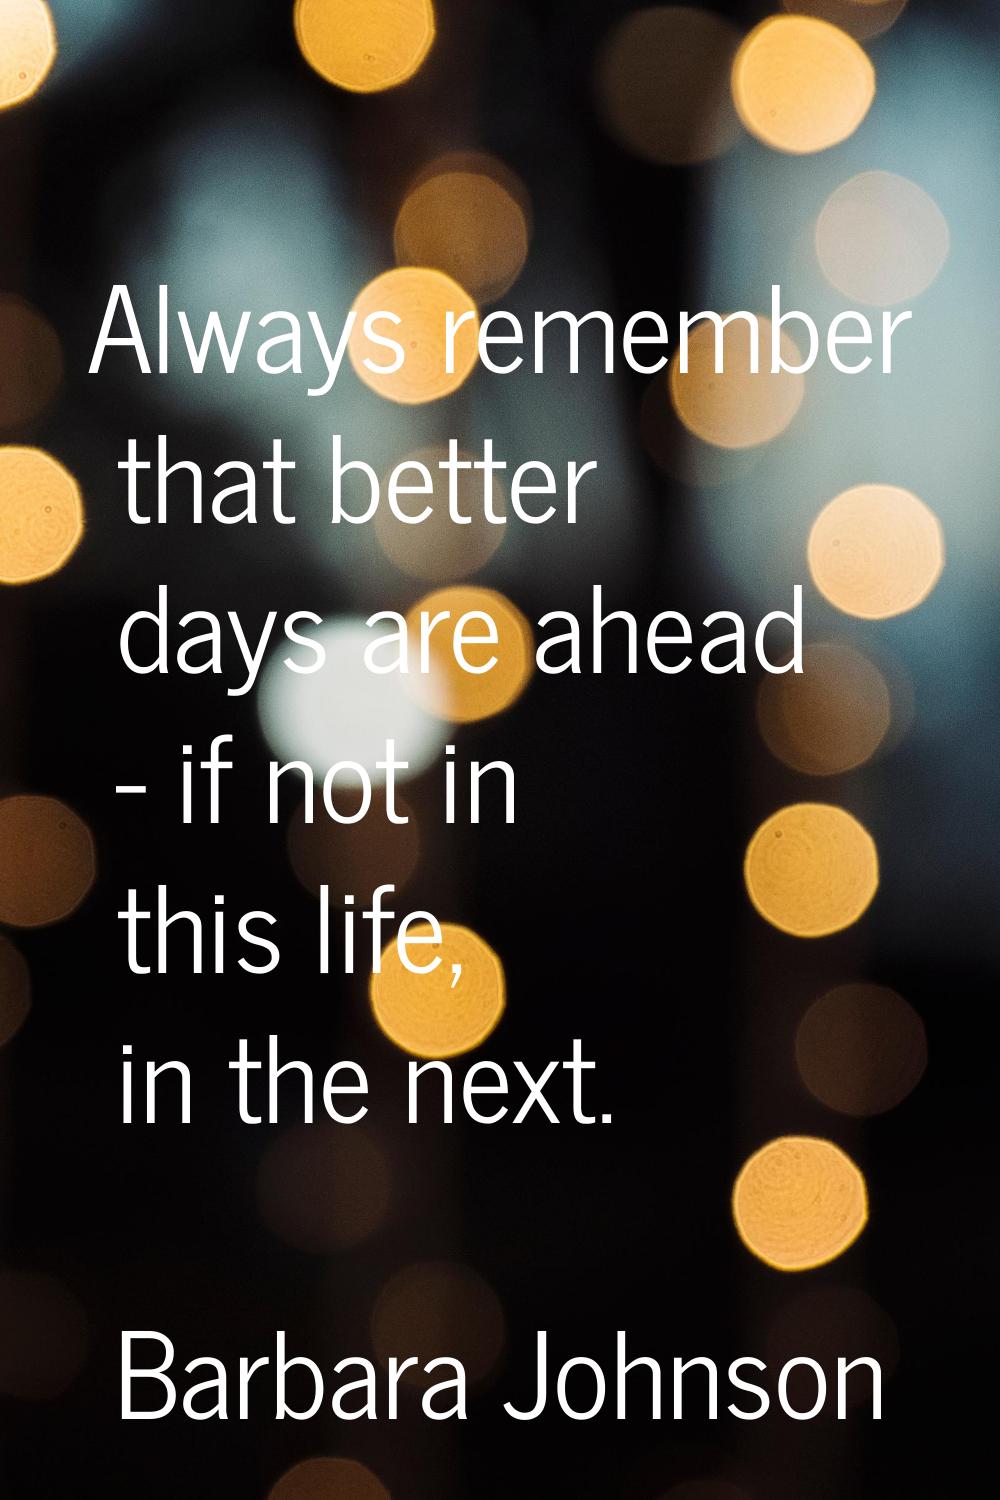 Always remember that better days are ahead - if not in this life, in the next.